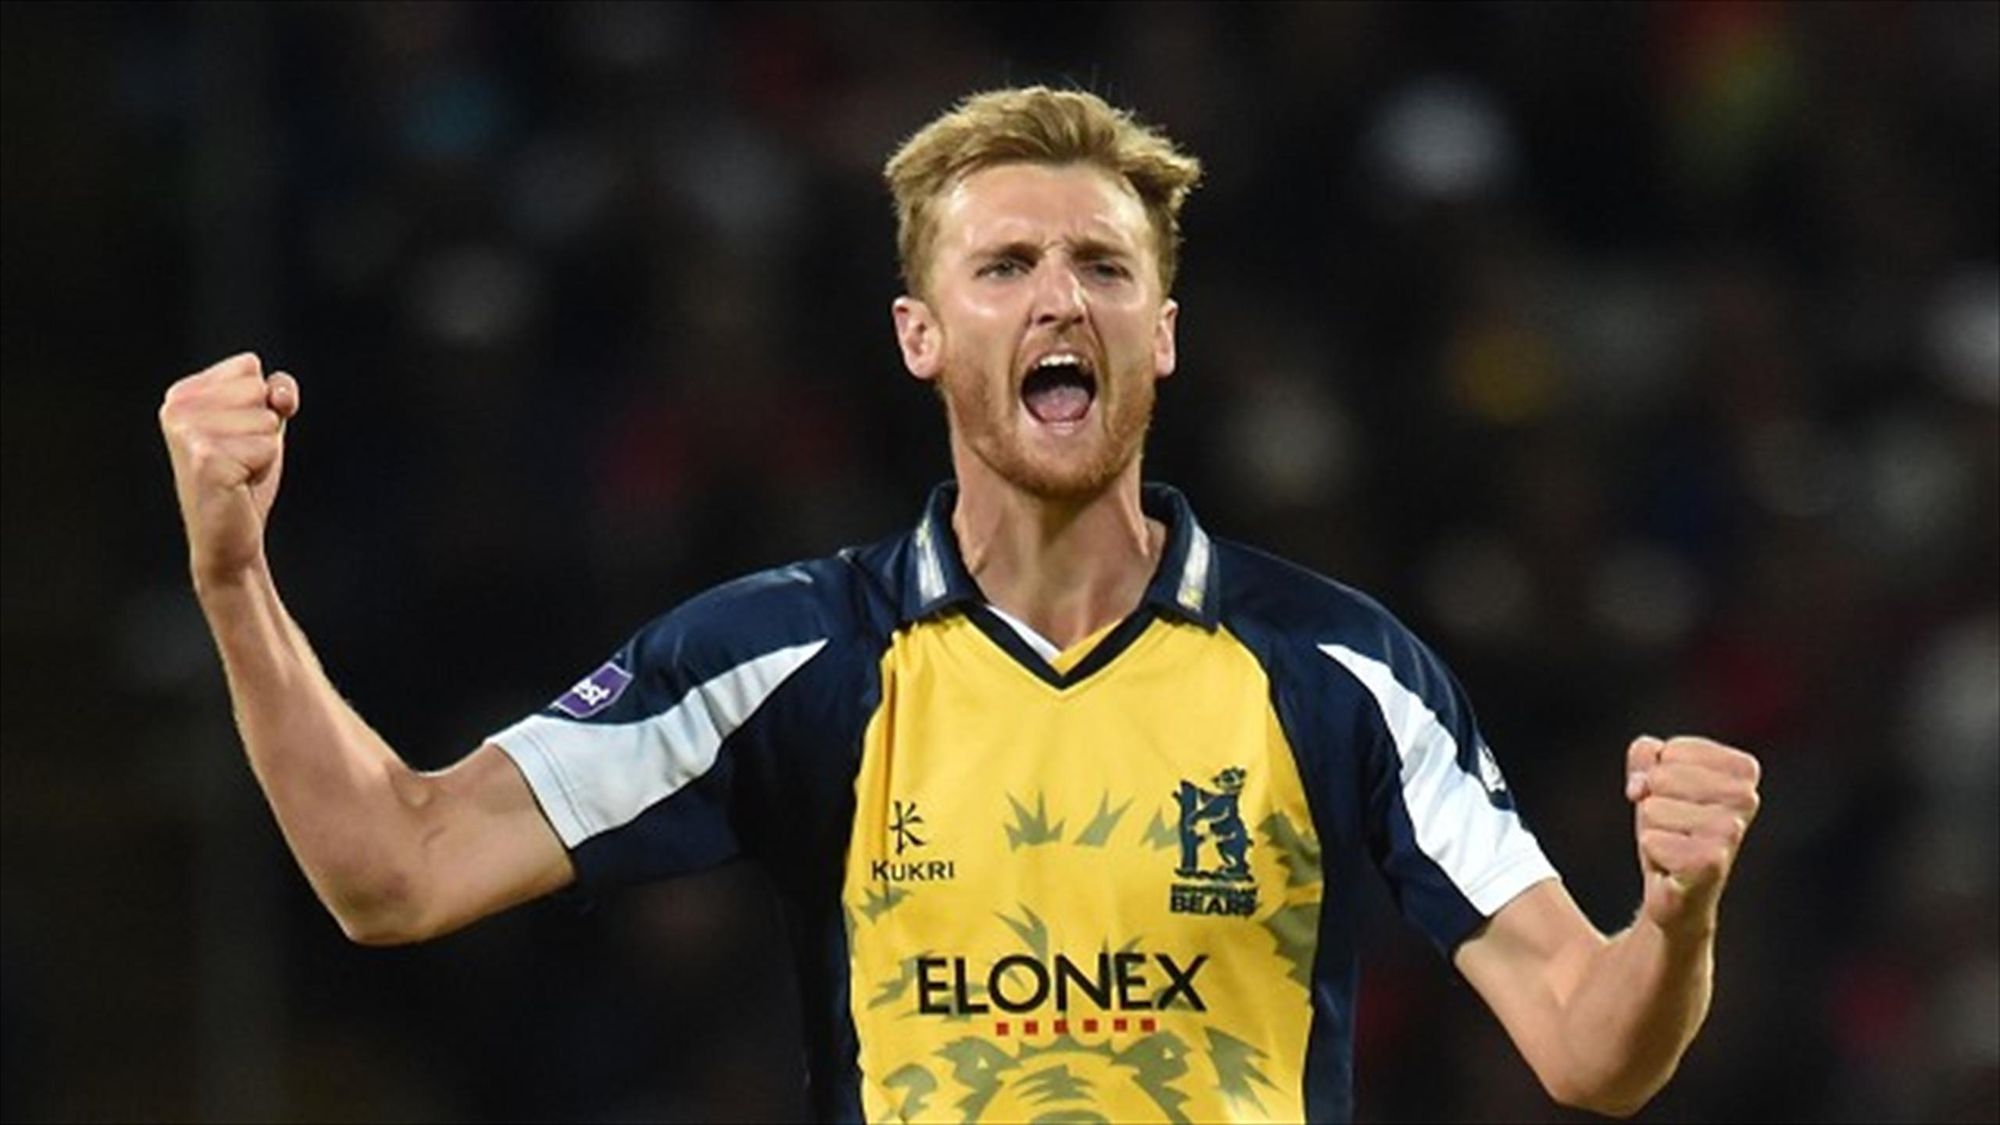 Olly Hannon-Dalby has signed a contract extension with the Warwickshire club until 2025